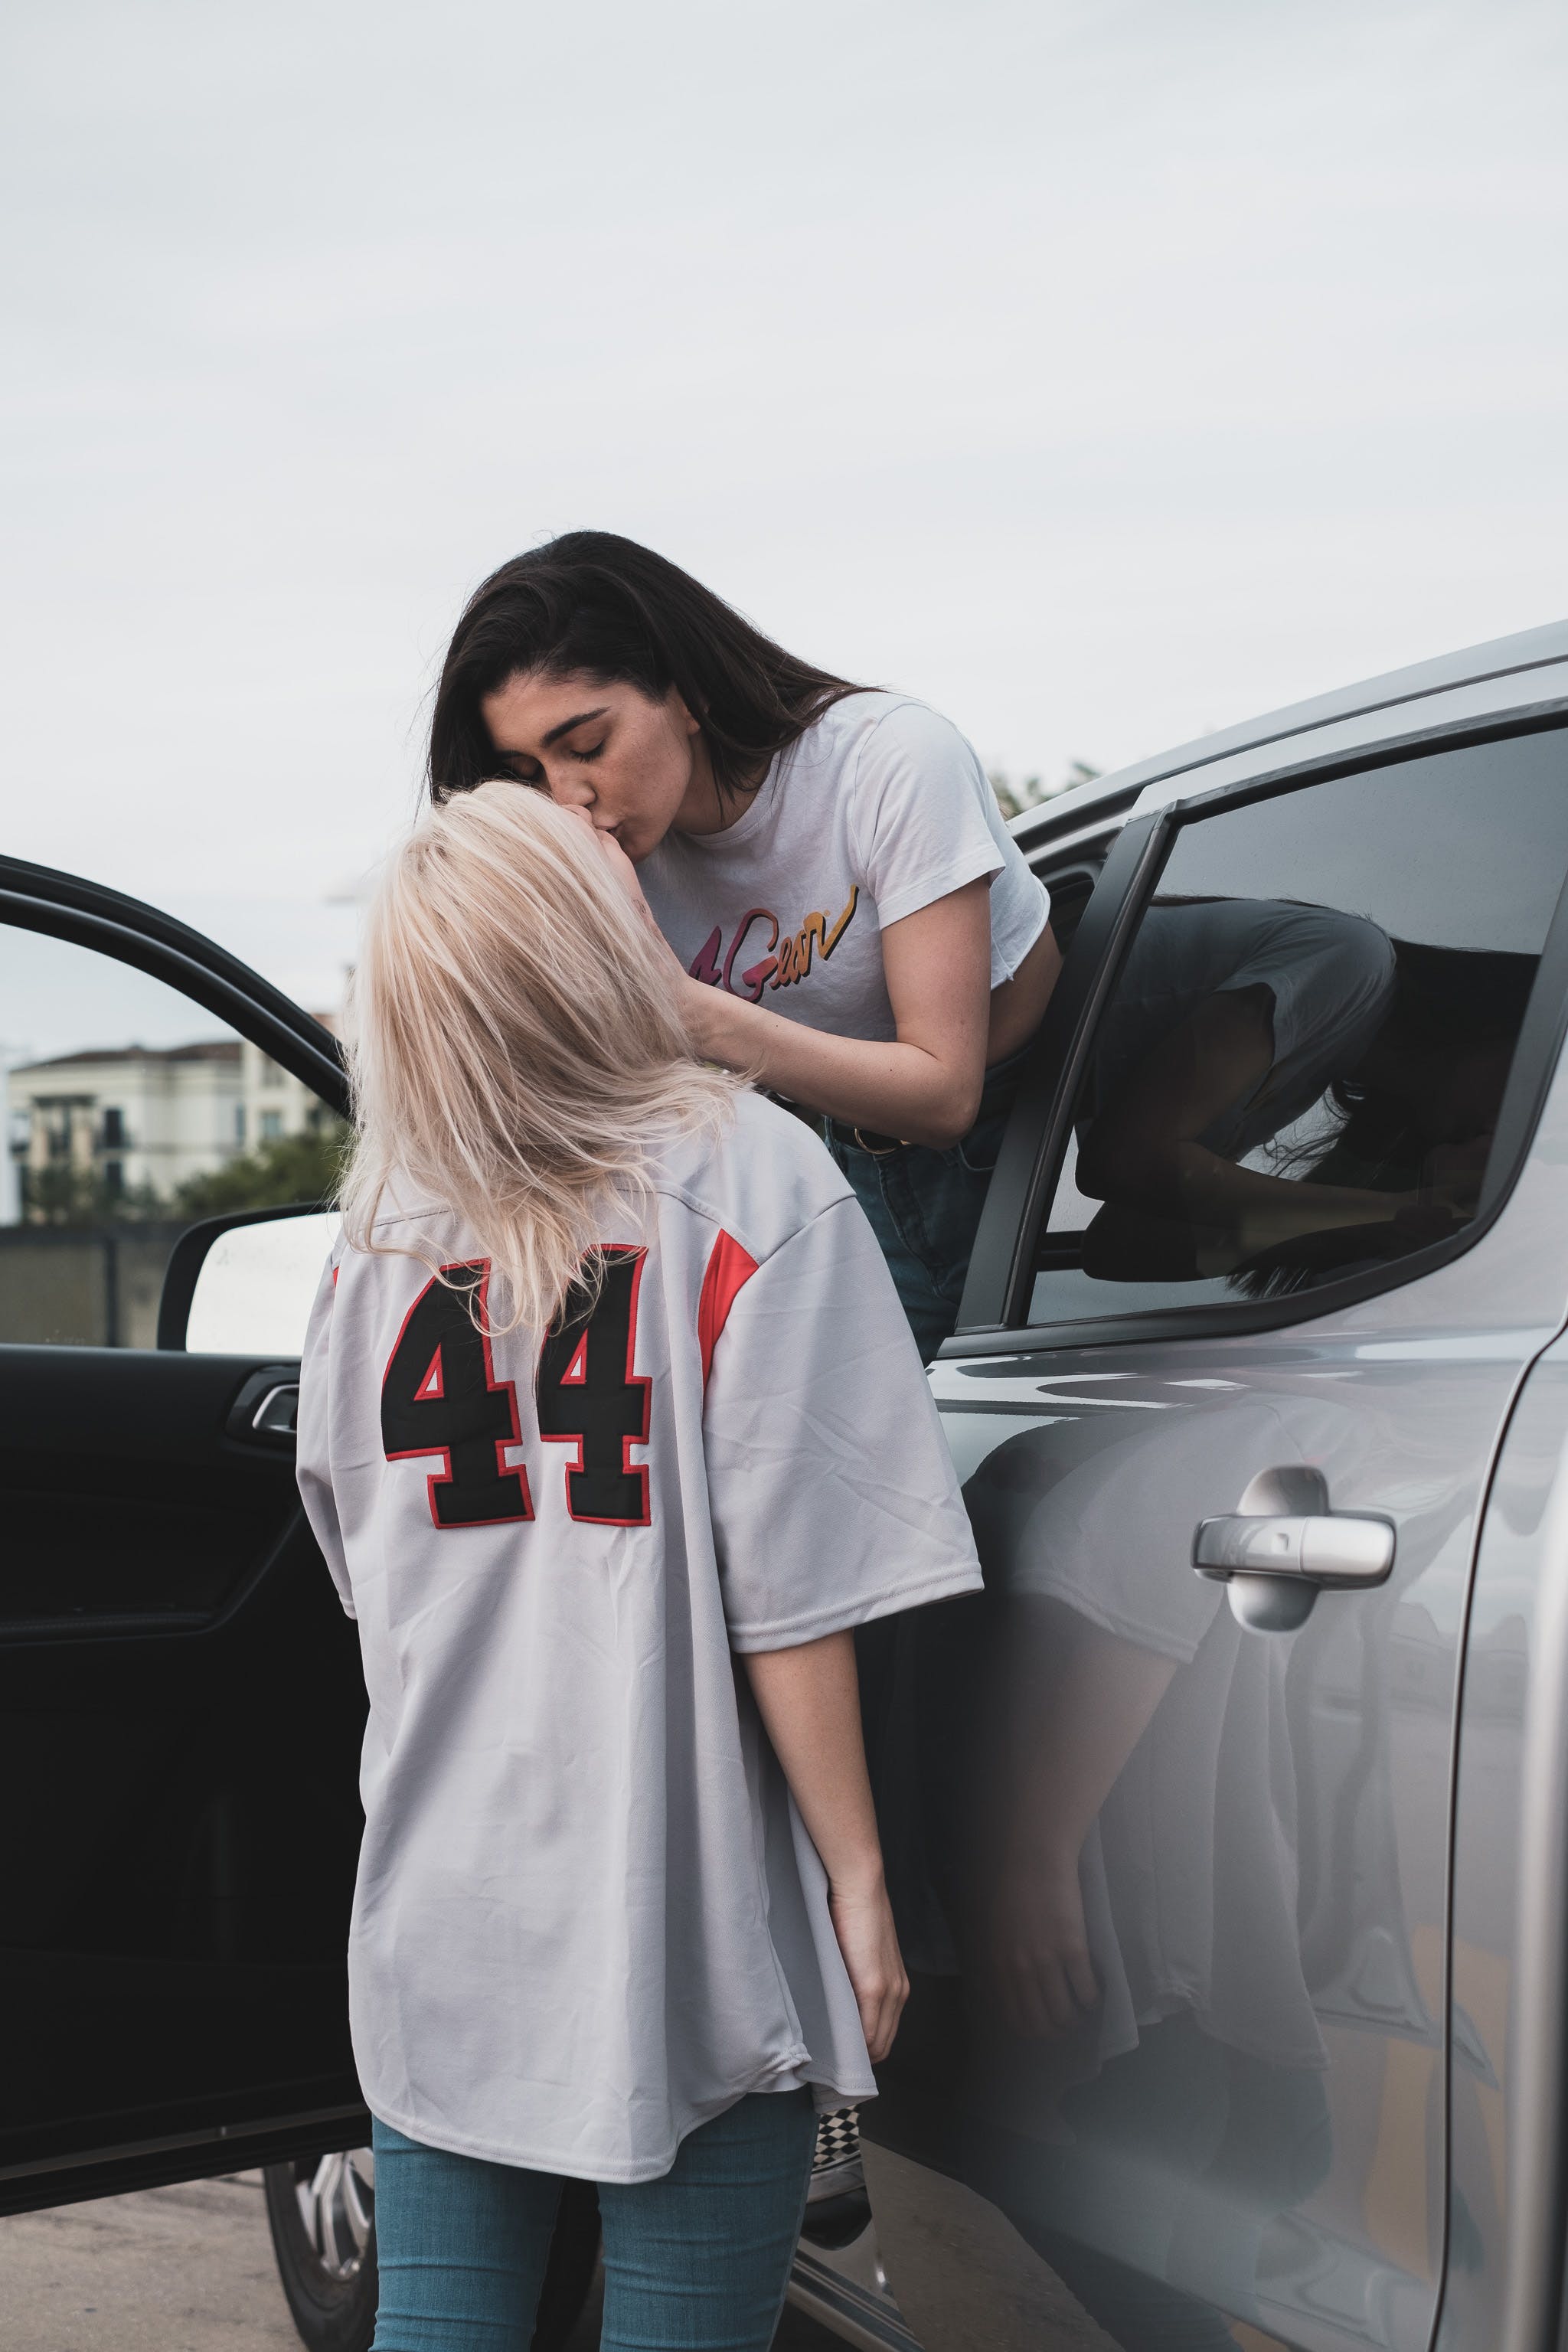 A couple kissing by a car | Source: Pexels